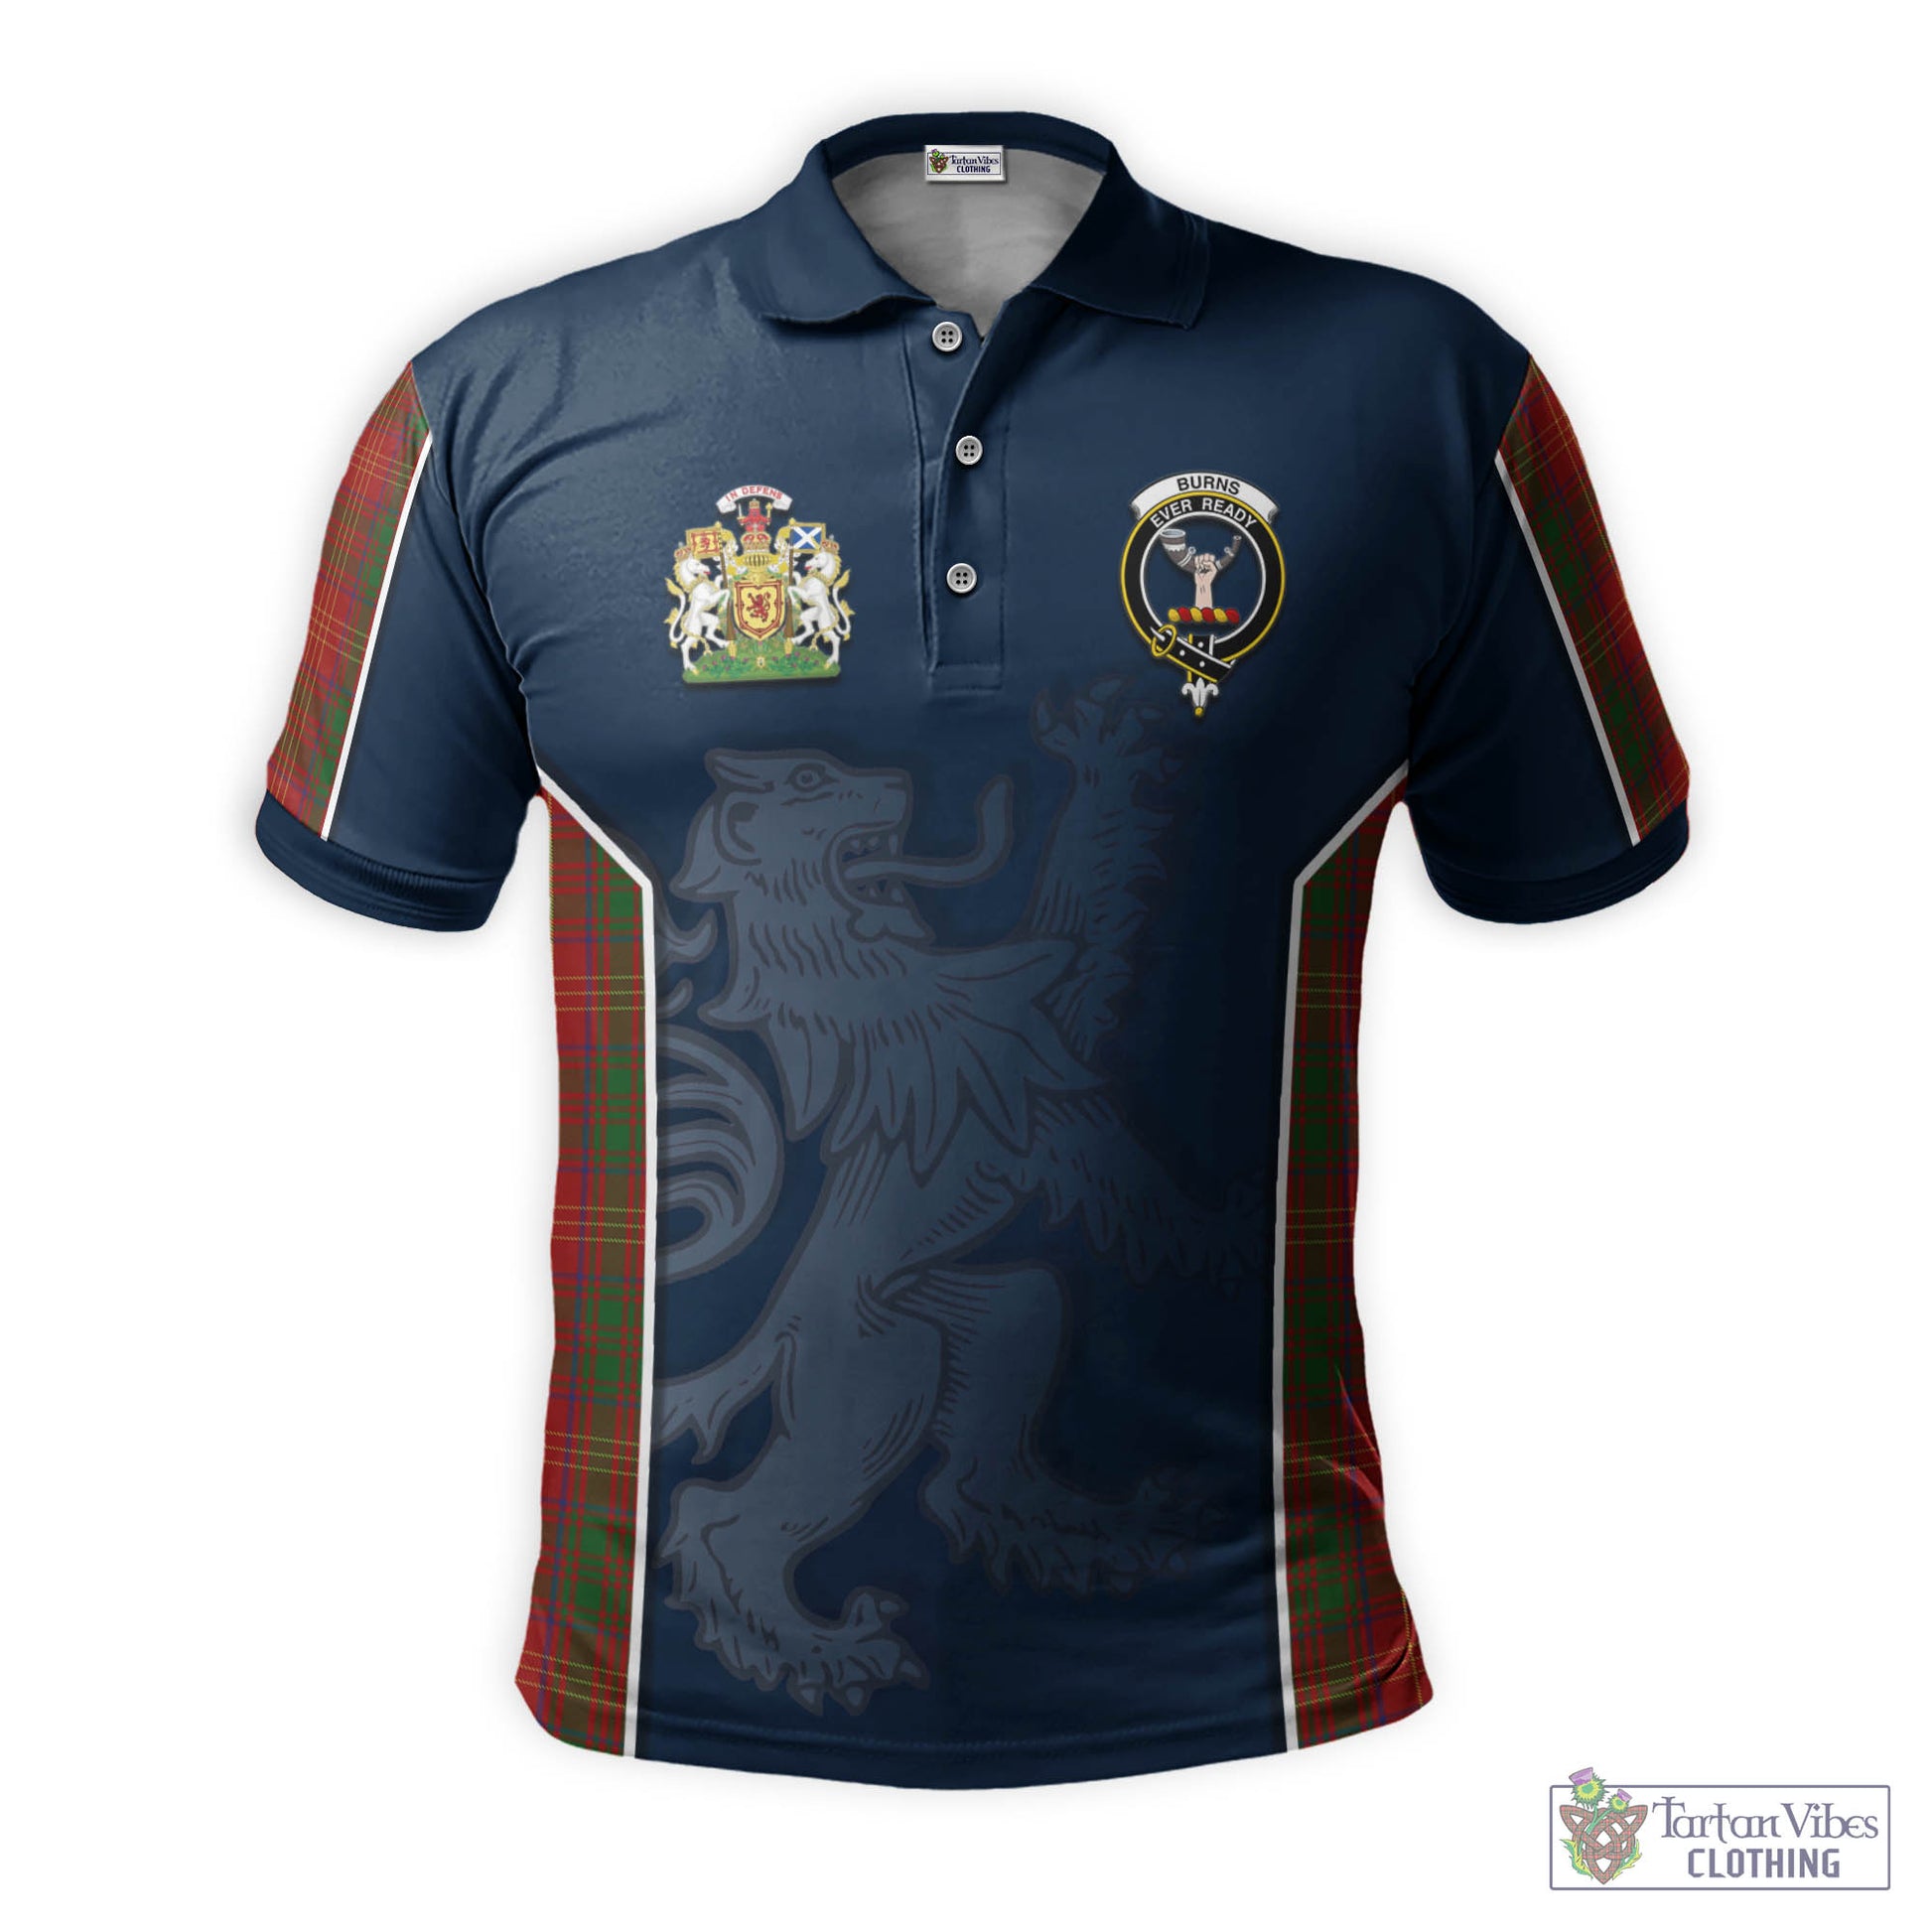 Tartan Vibes Clothing Burns Tartan Men's Polo Shirt with Family Crest and Lion Rampant Vibes Sport Style